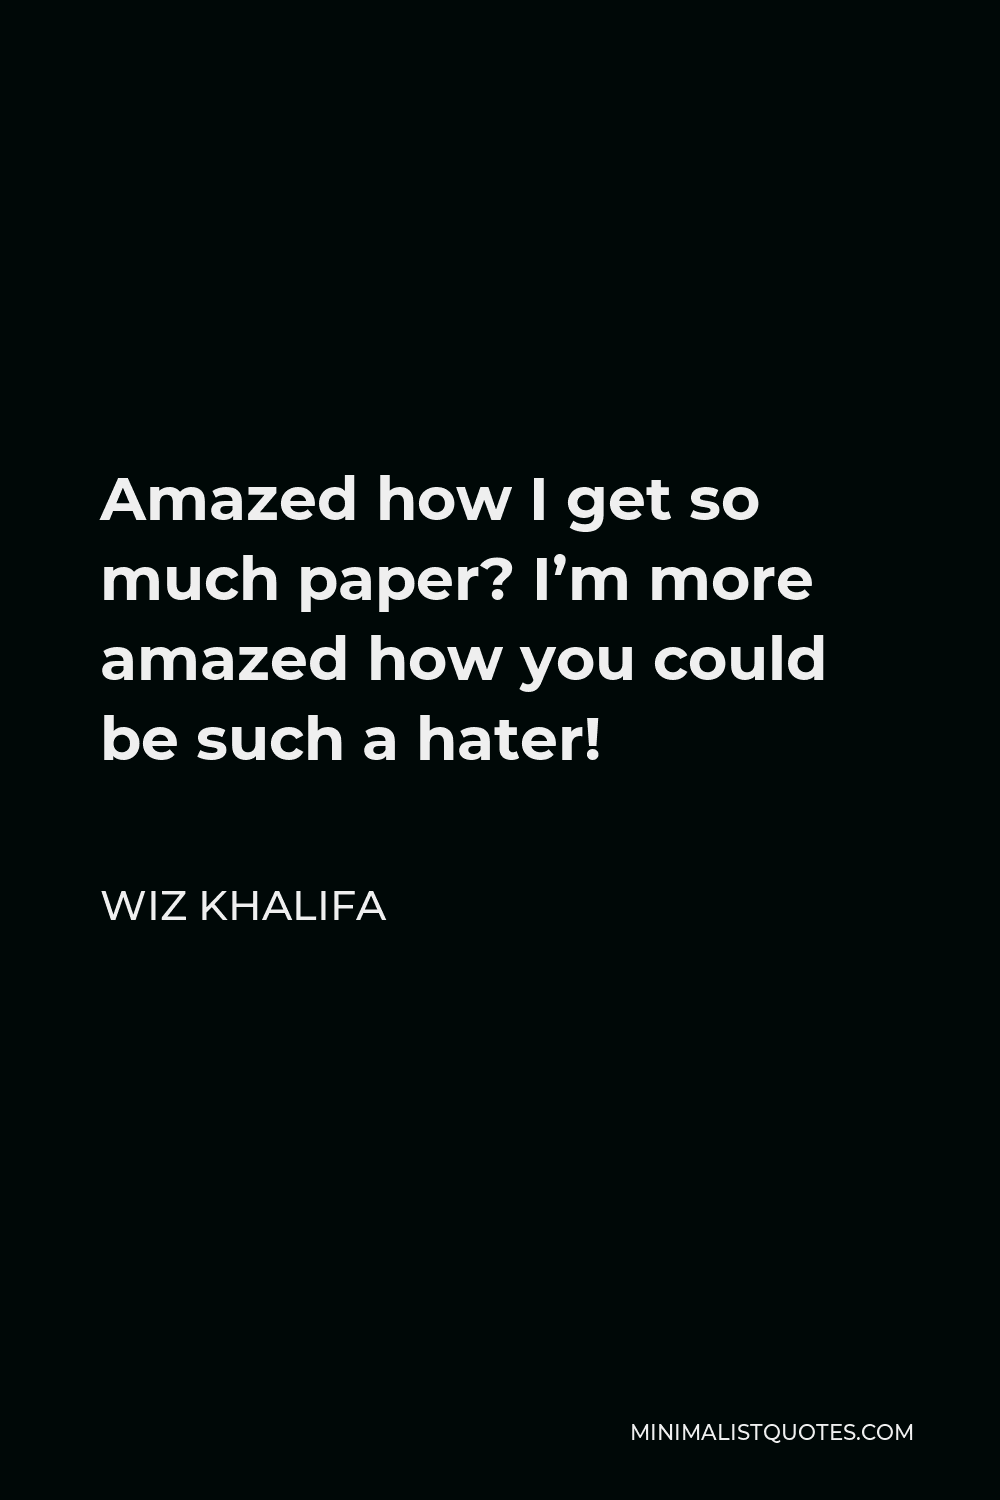 Wiz Khalifa Quote - Amazed how I get so much paper? I’m more amazed how you could be such a hater!